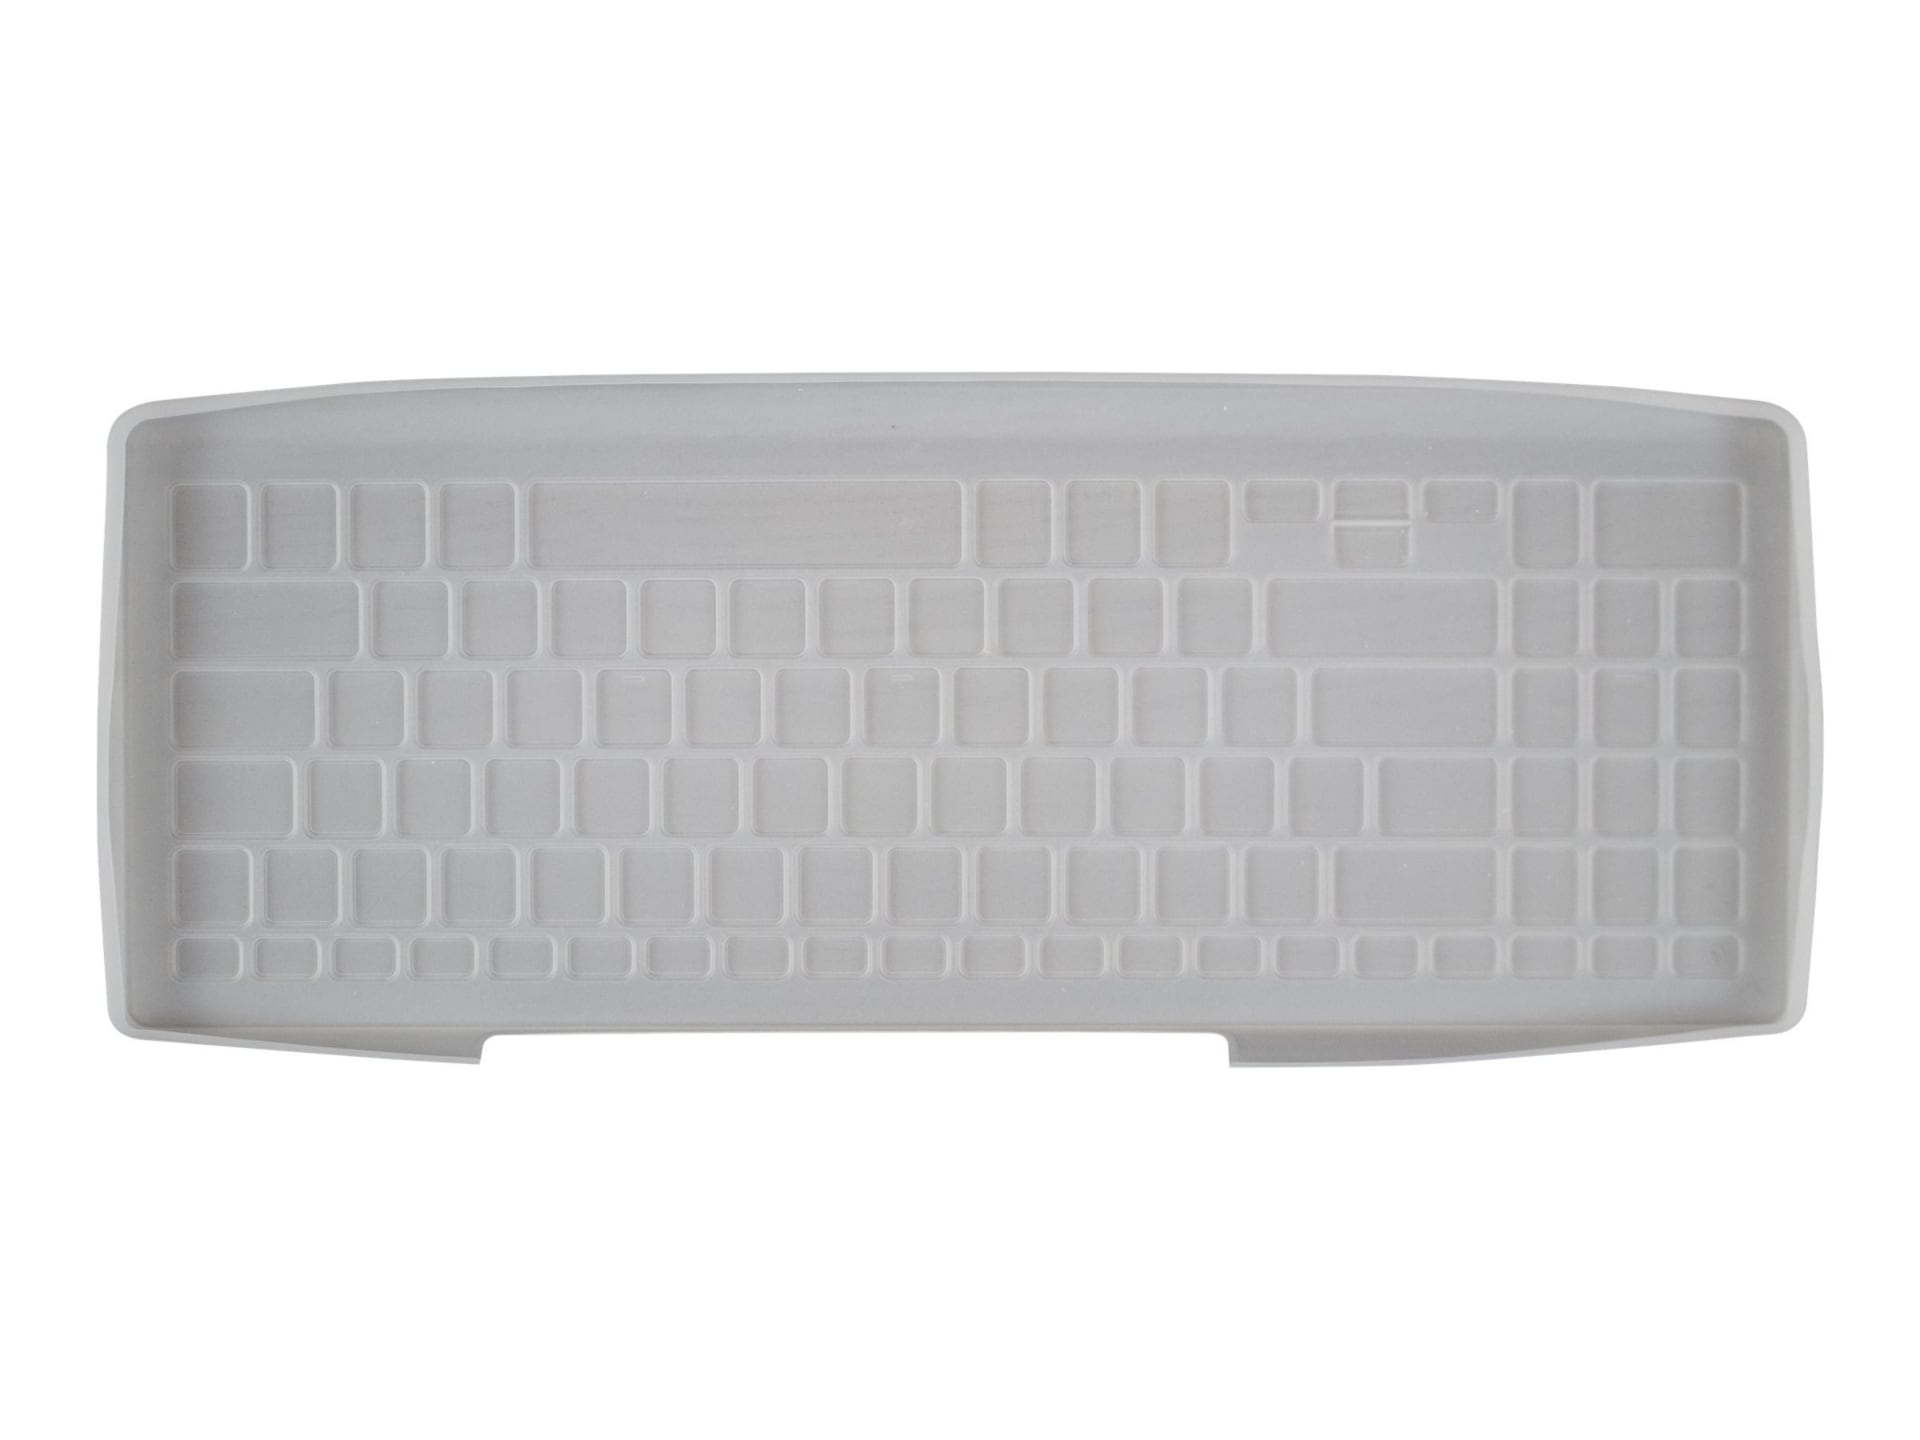 Seal Shield Key Fit - keyboard cover - silicone, in white box